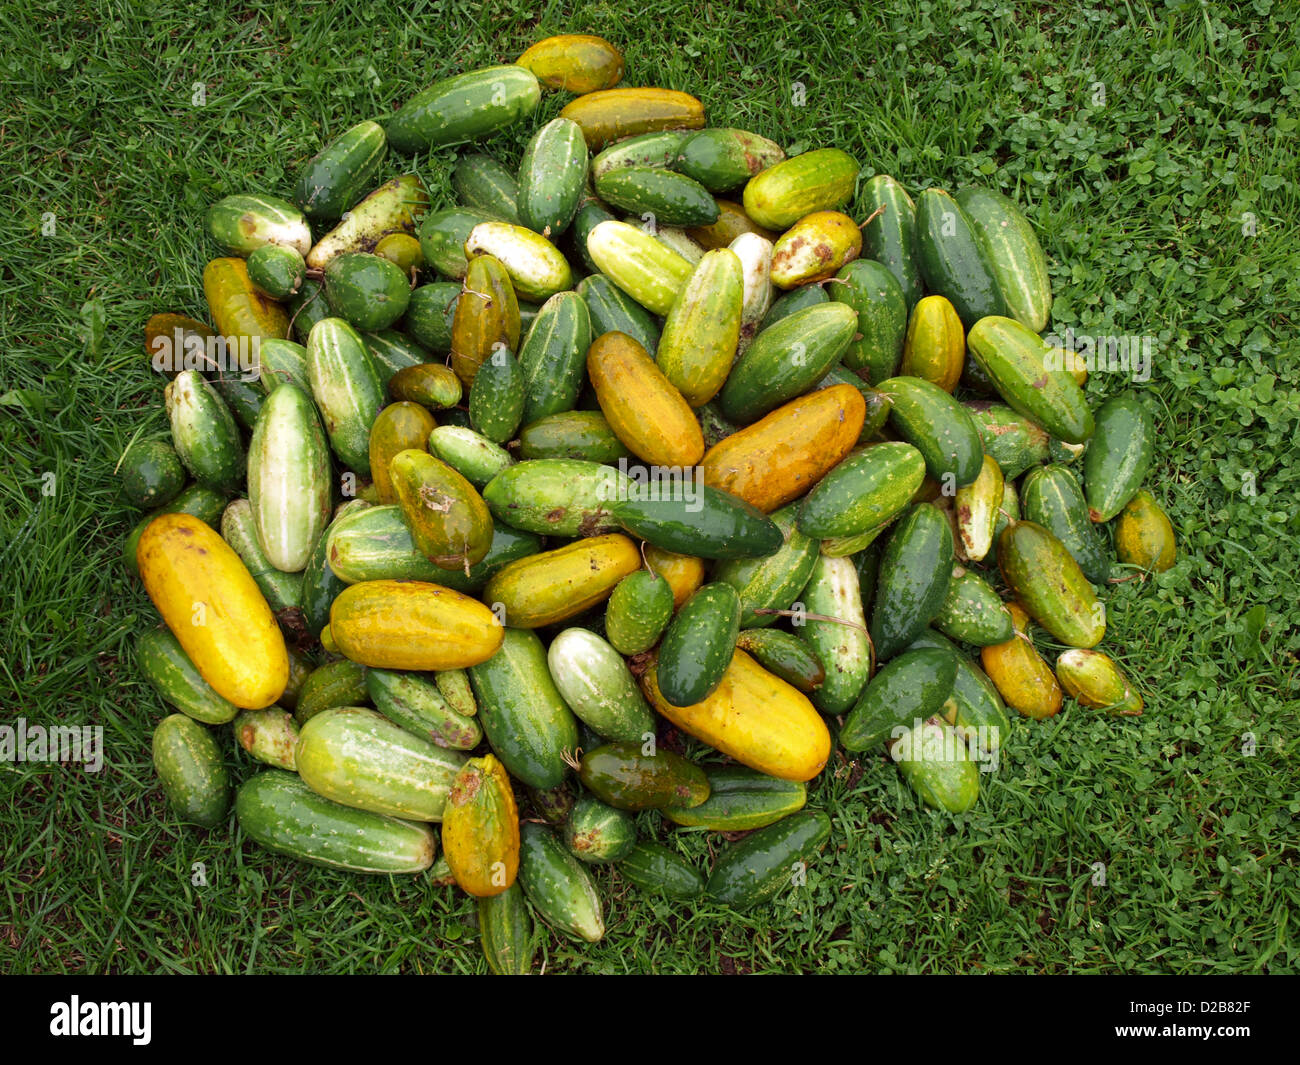 Stack of unsorted cucumbers on green grass Stock Photo